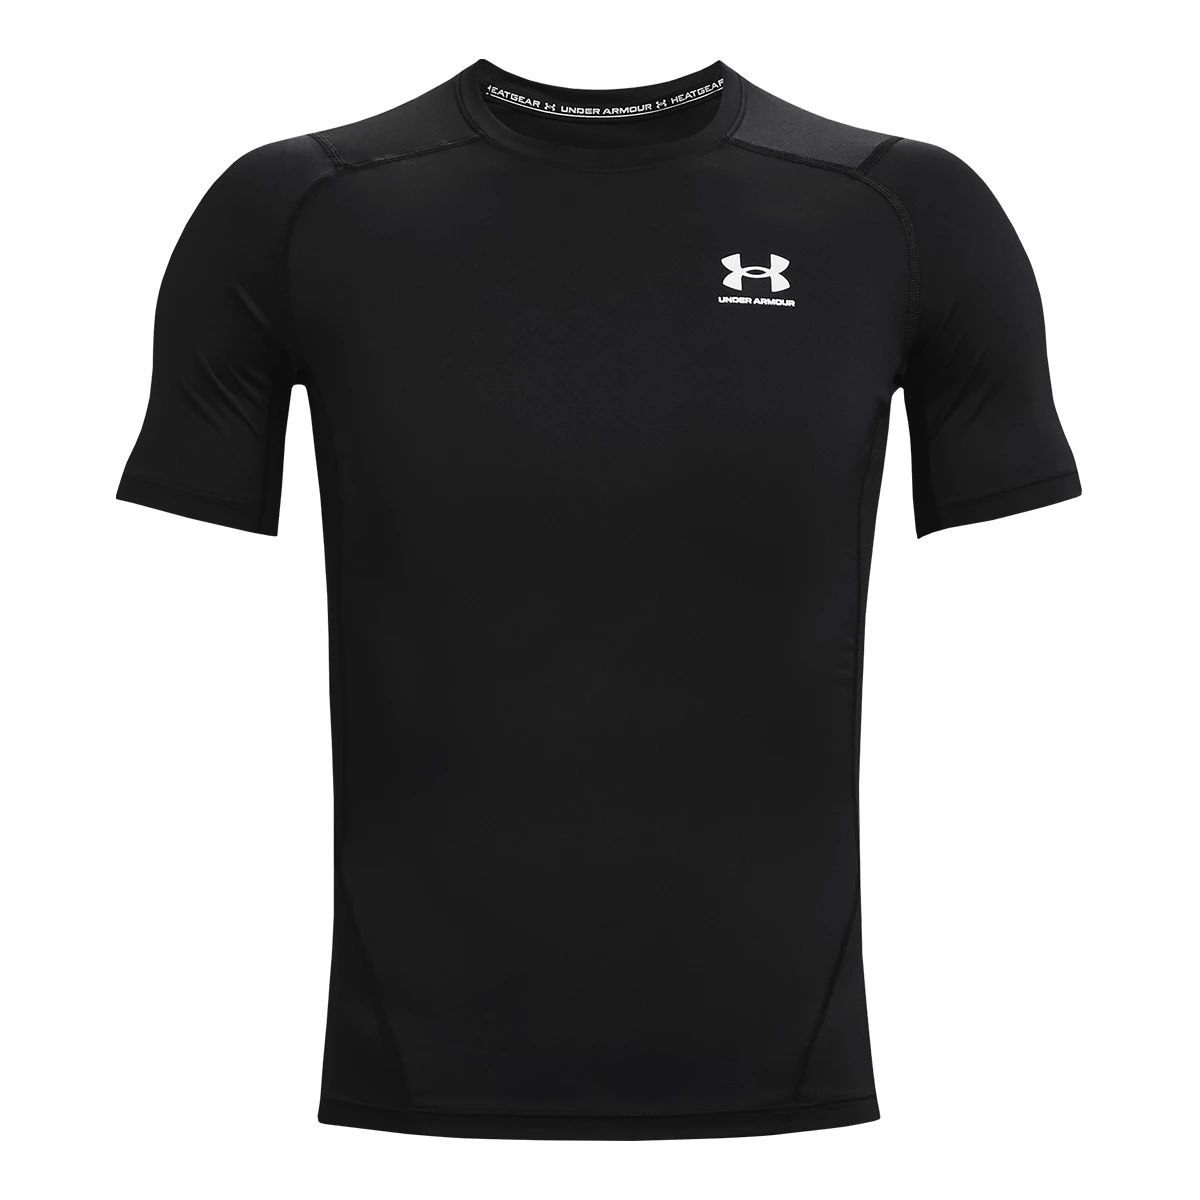 Under Armour Long Sleeve Compression Top - Green – Eurosport Soccer Stores